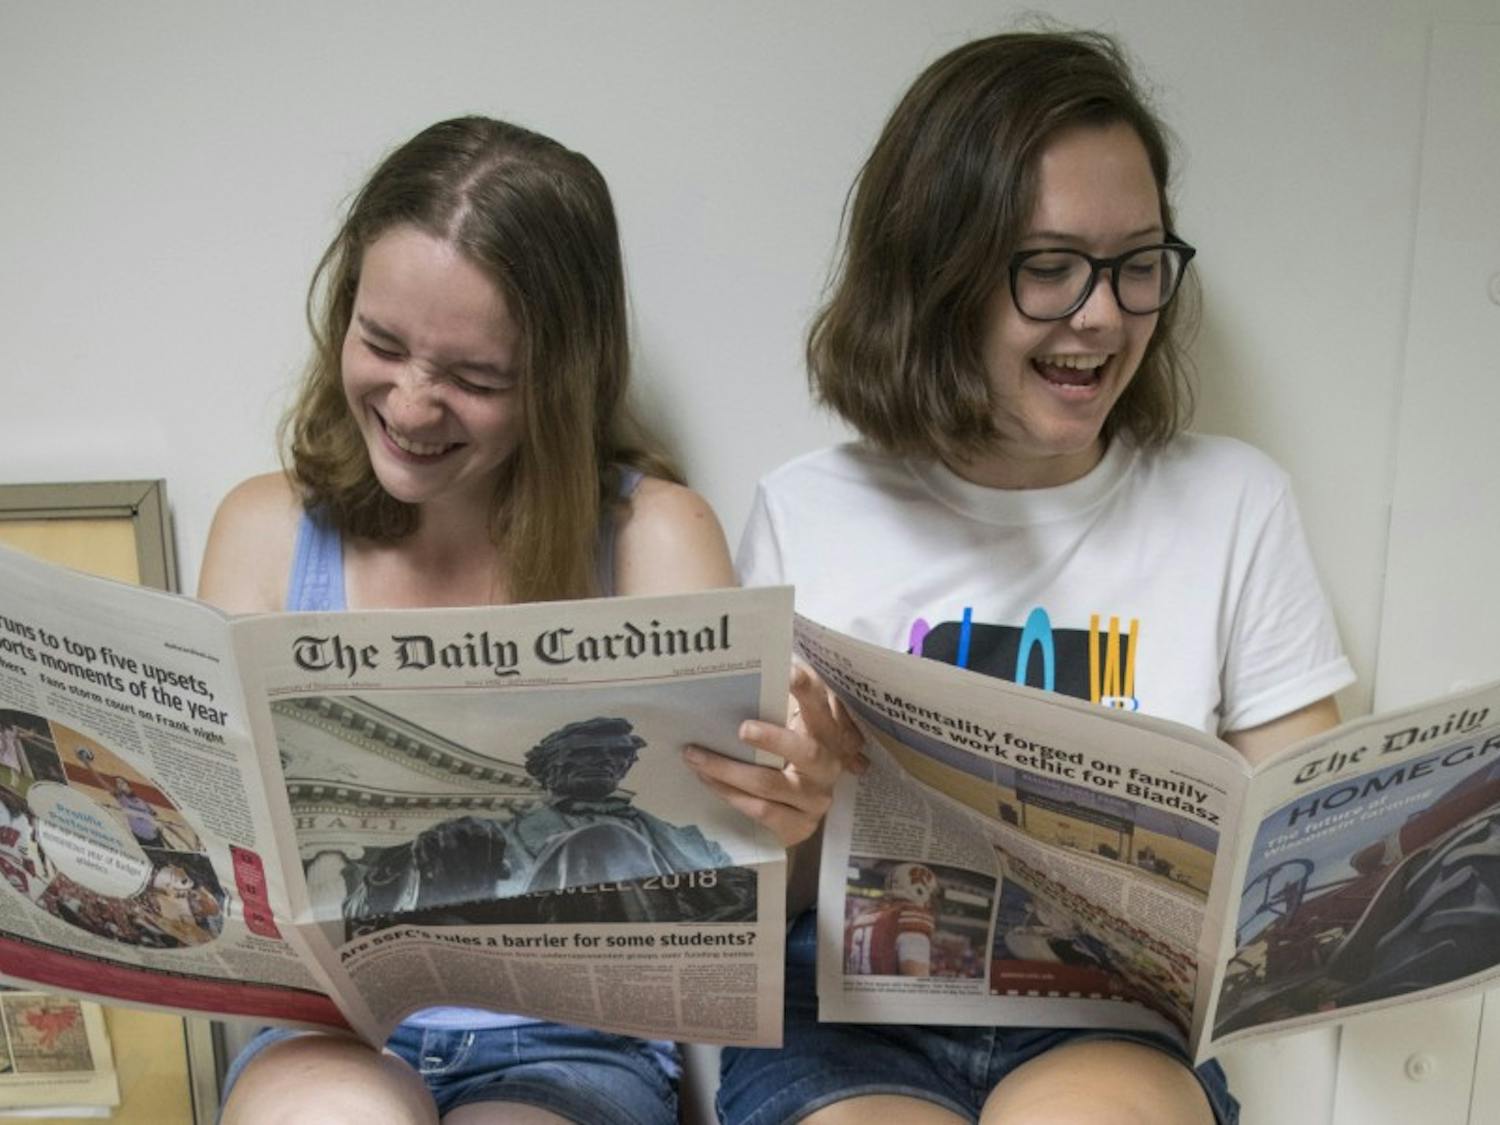 Managing Editor Samantha Nesovanovic and Editor-in-Chief Sammy Gibbons hope new UW-Madison students find their group to nest in in order to make campus feel a little smaller &mdash; we would love for that to be The Daily Cardinal.